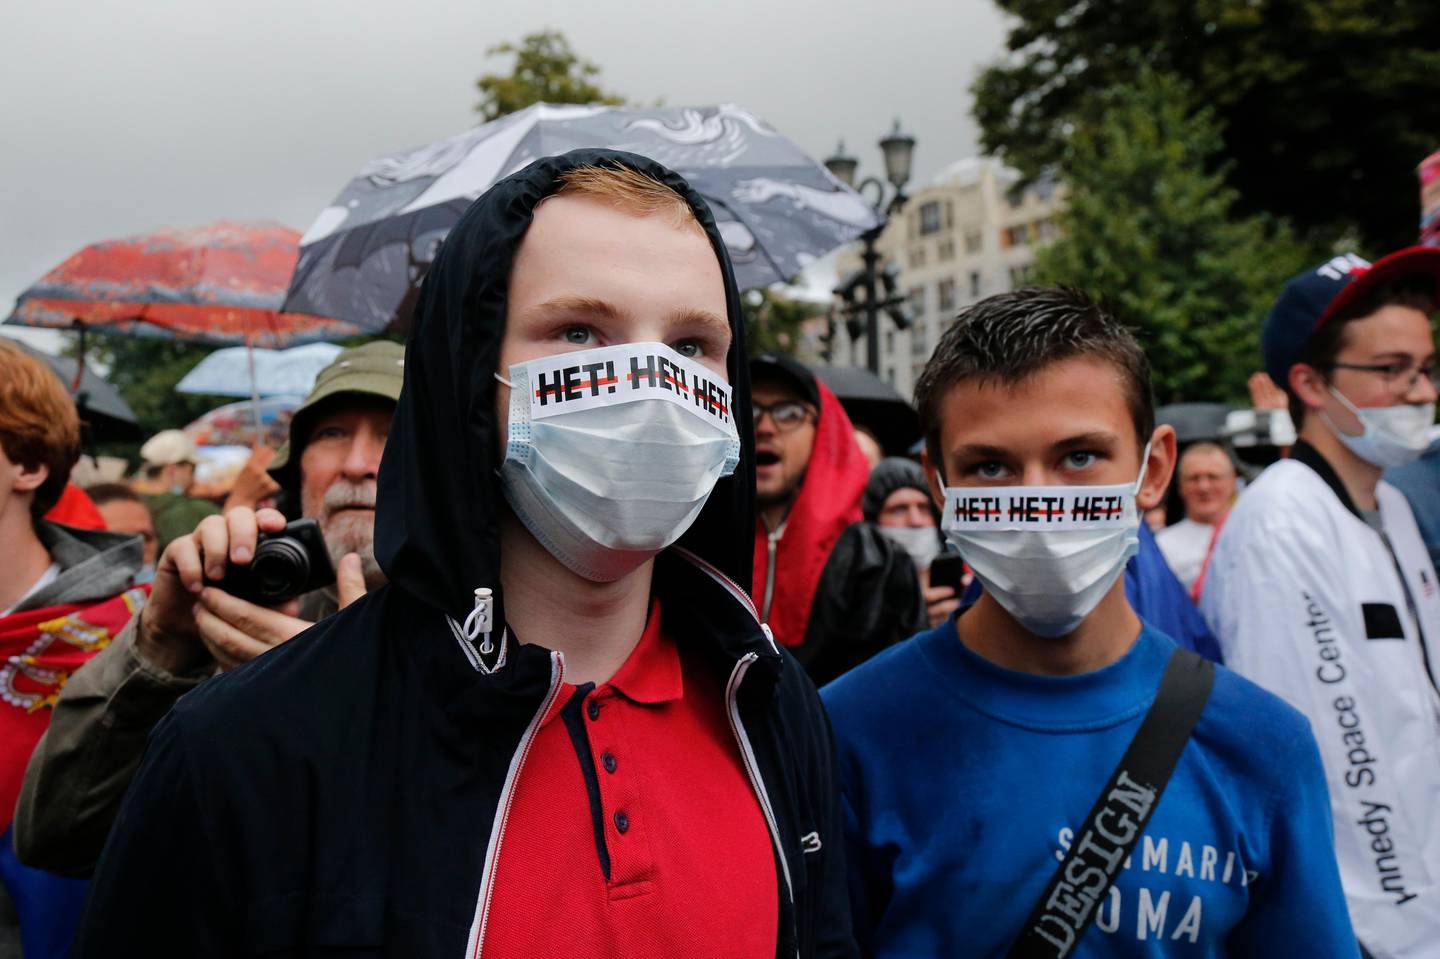 People gather to collect signatures to cancel the results of voting on amendments to the Constitution in Moscow, Russia, Wednesday, July 15, 2020. Writing on the face masks reads "no". Earlier this month a group of opposition activists called for a protest against the constitutional reform that allows Russian President Vladimir Putin to stay in power until 2036. (AP Photo/Alexander Zemlianichenko)